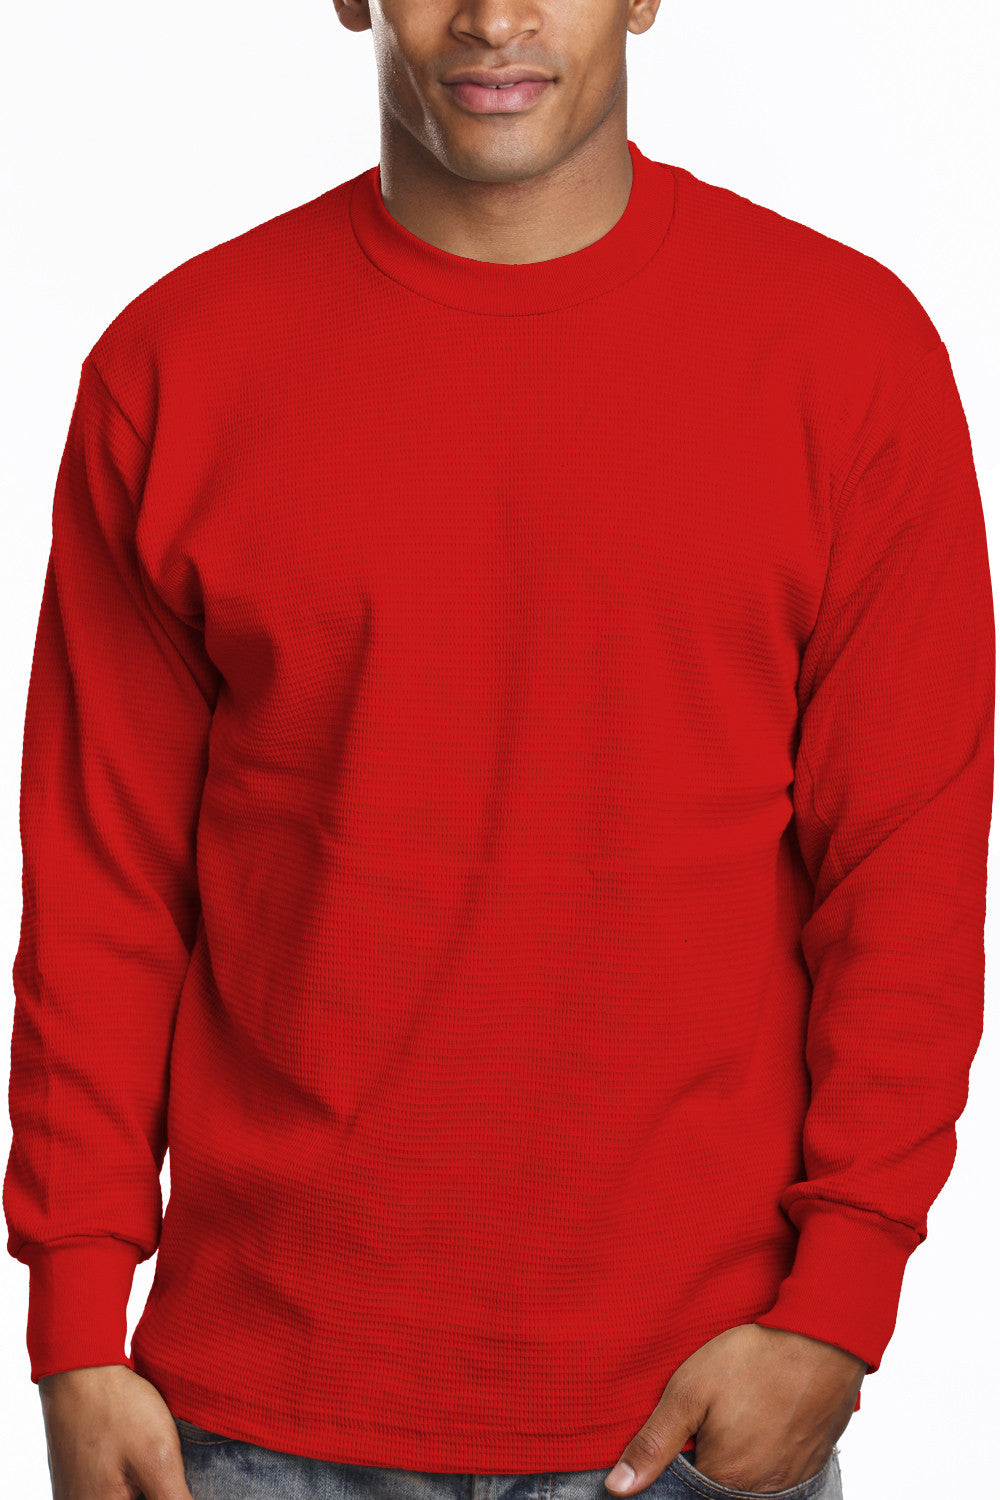 Men's Cozy Red Thermal Knit Top waffle knit, sizes S-XL. Variety of colors. Fabric: Solid-100% Cotton, Charcoal & H Grey-80% Cotton 20% Poly. 9.2 oz